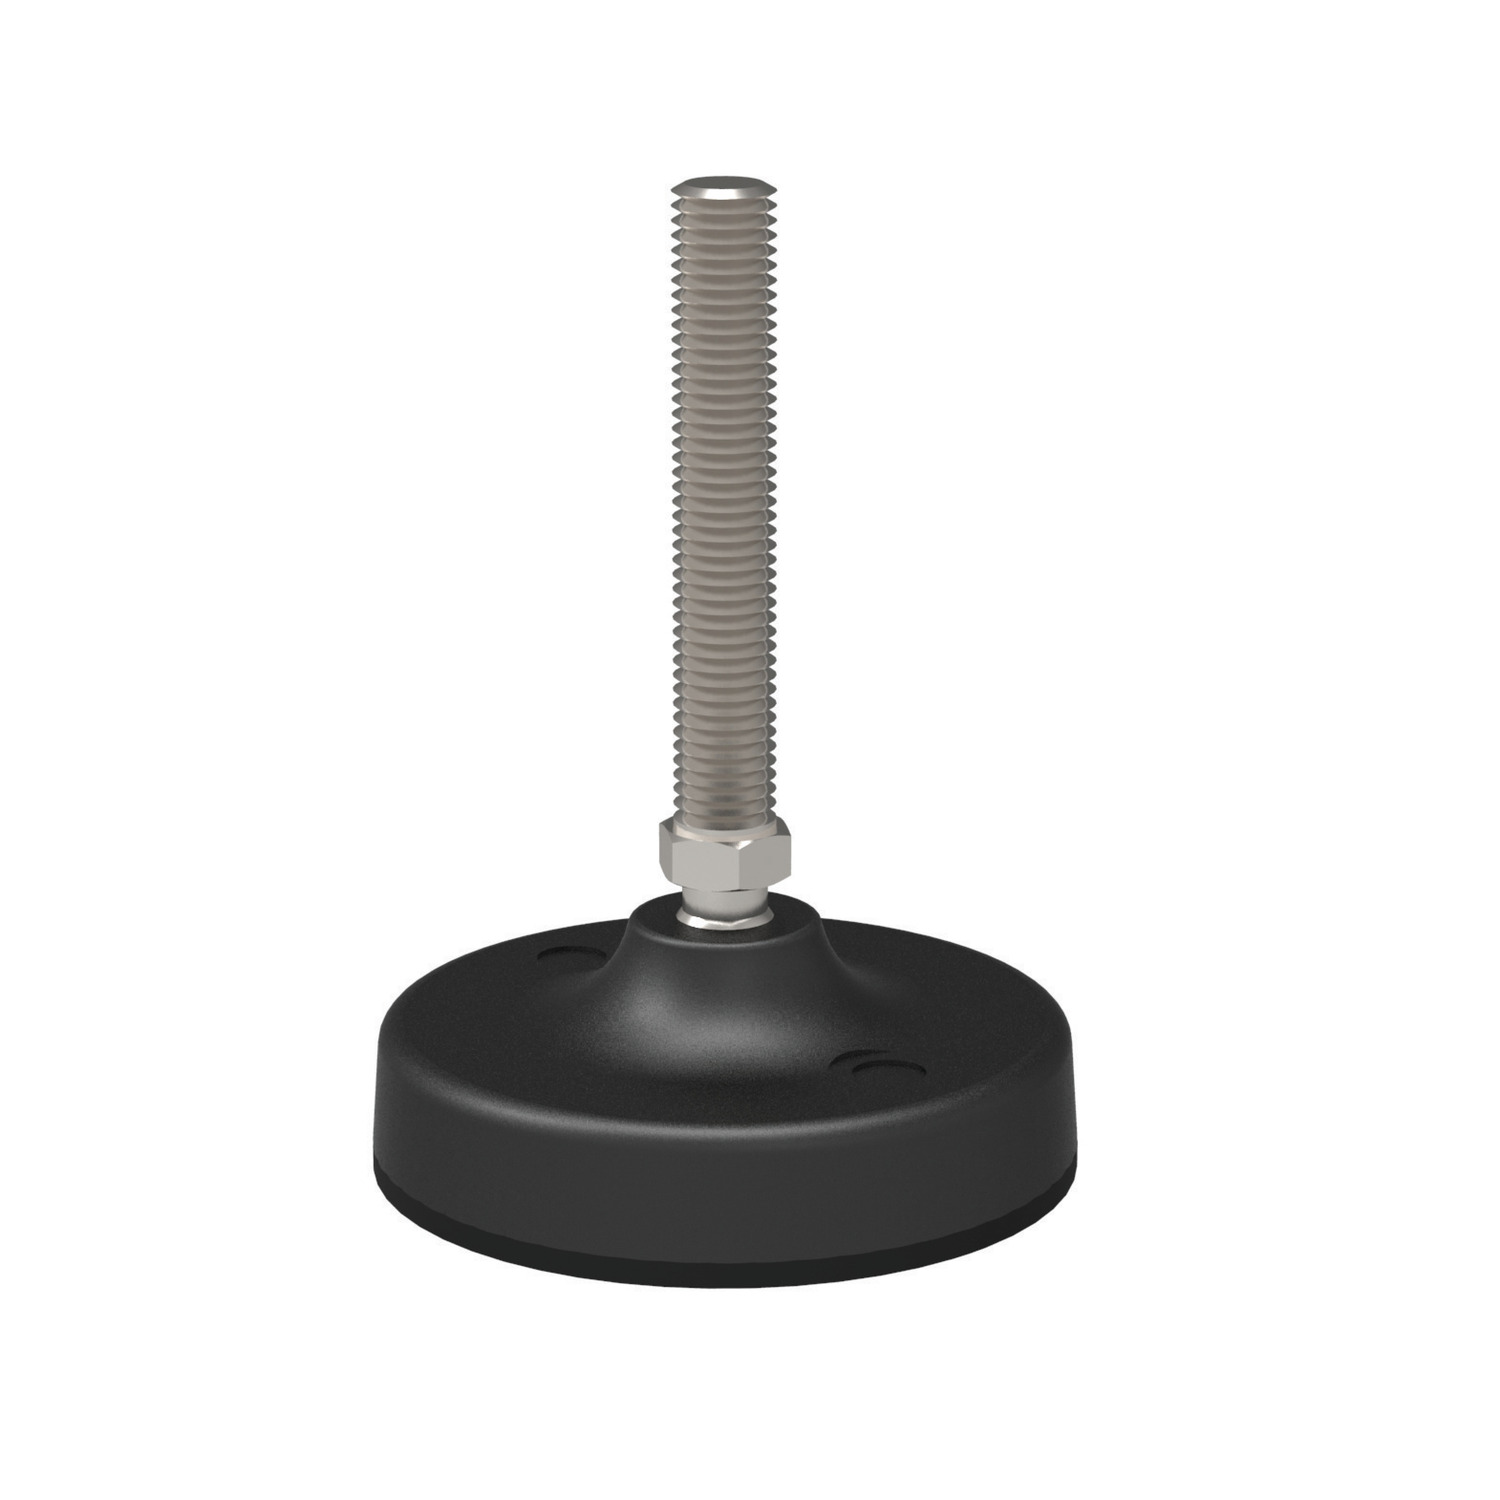 Product P2203.3, Levelling Feet - Heavy Duty bolt down option, bolt stainless steel / 